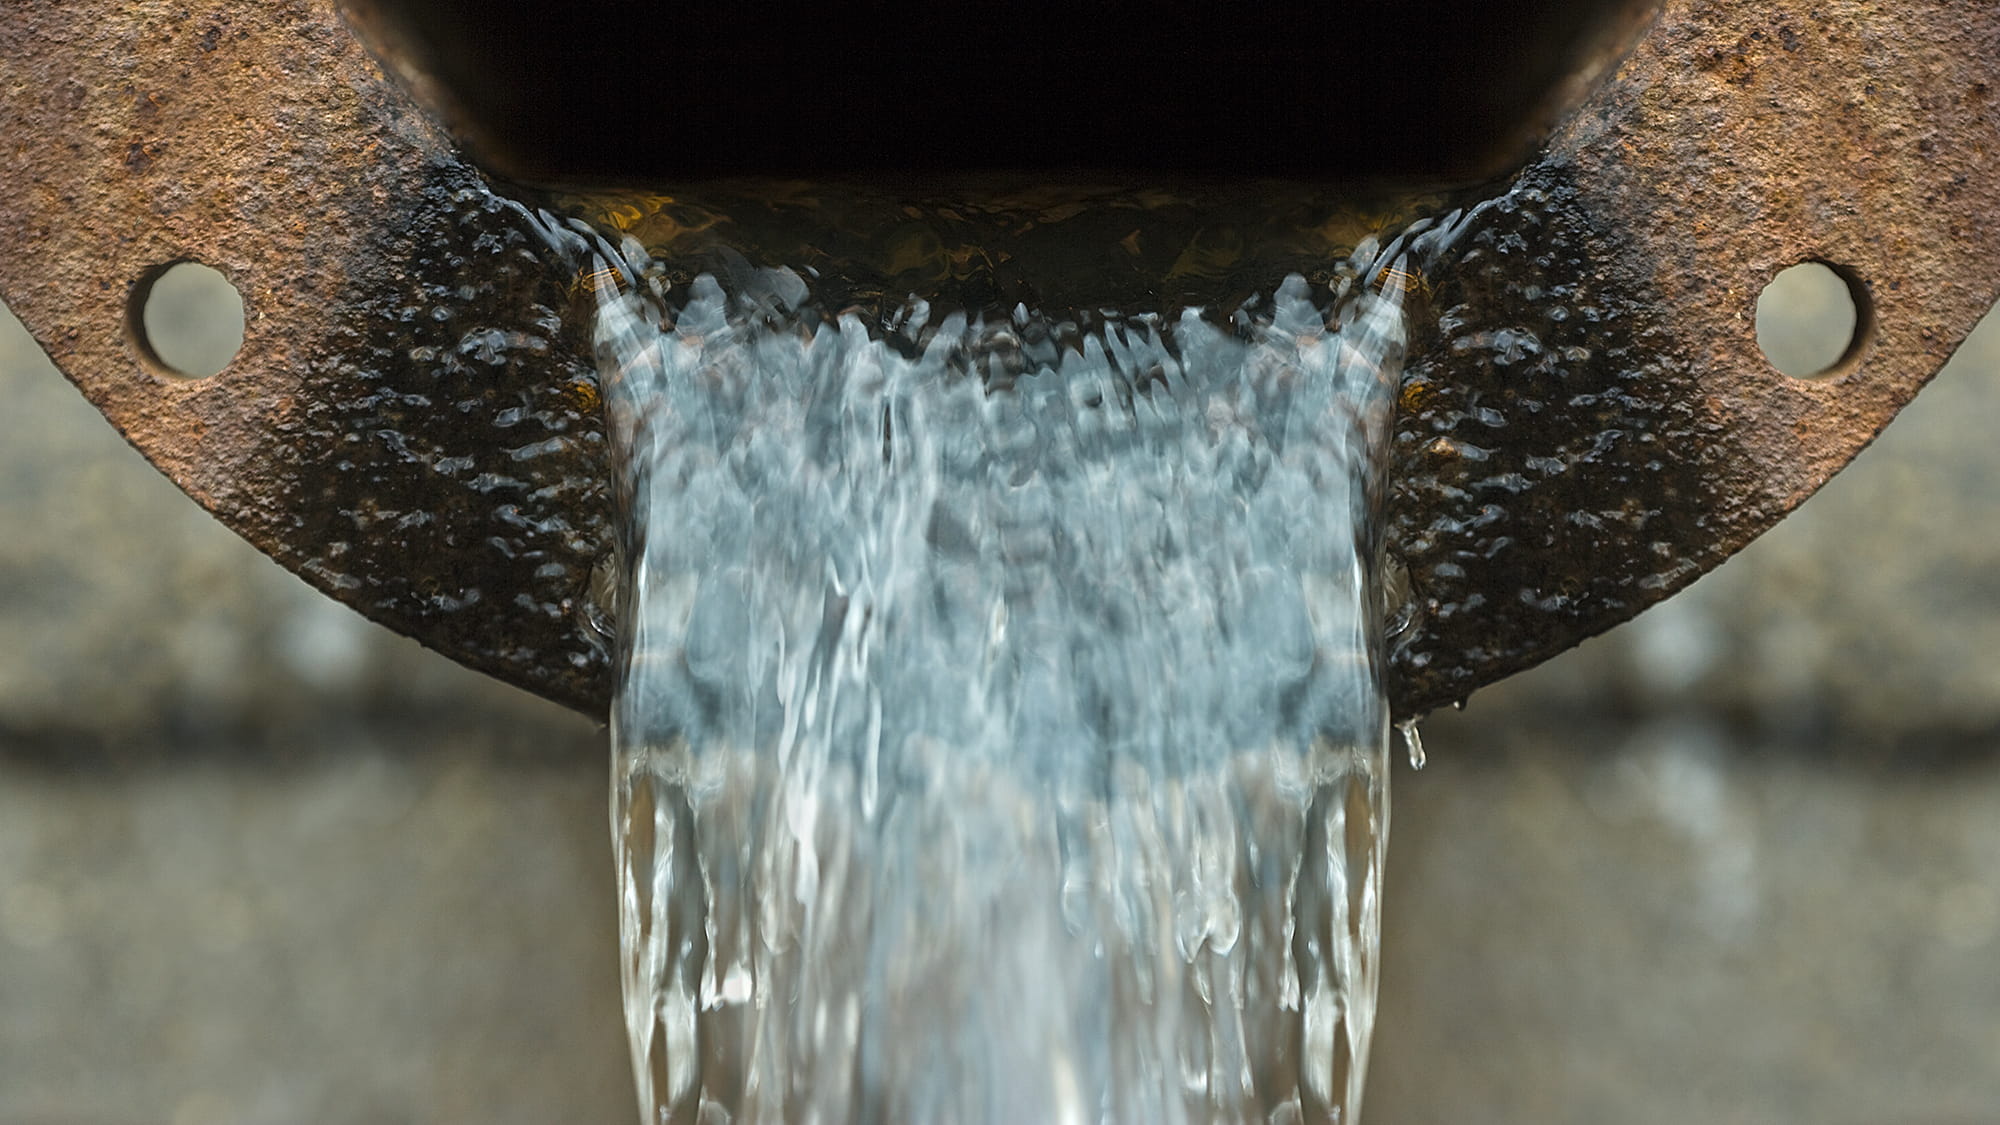 Water pouring out of drain